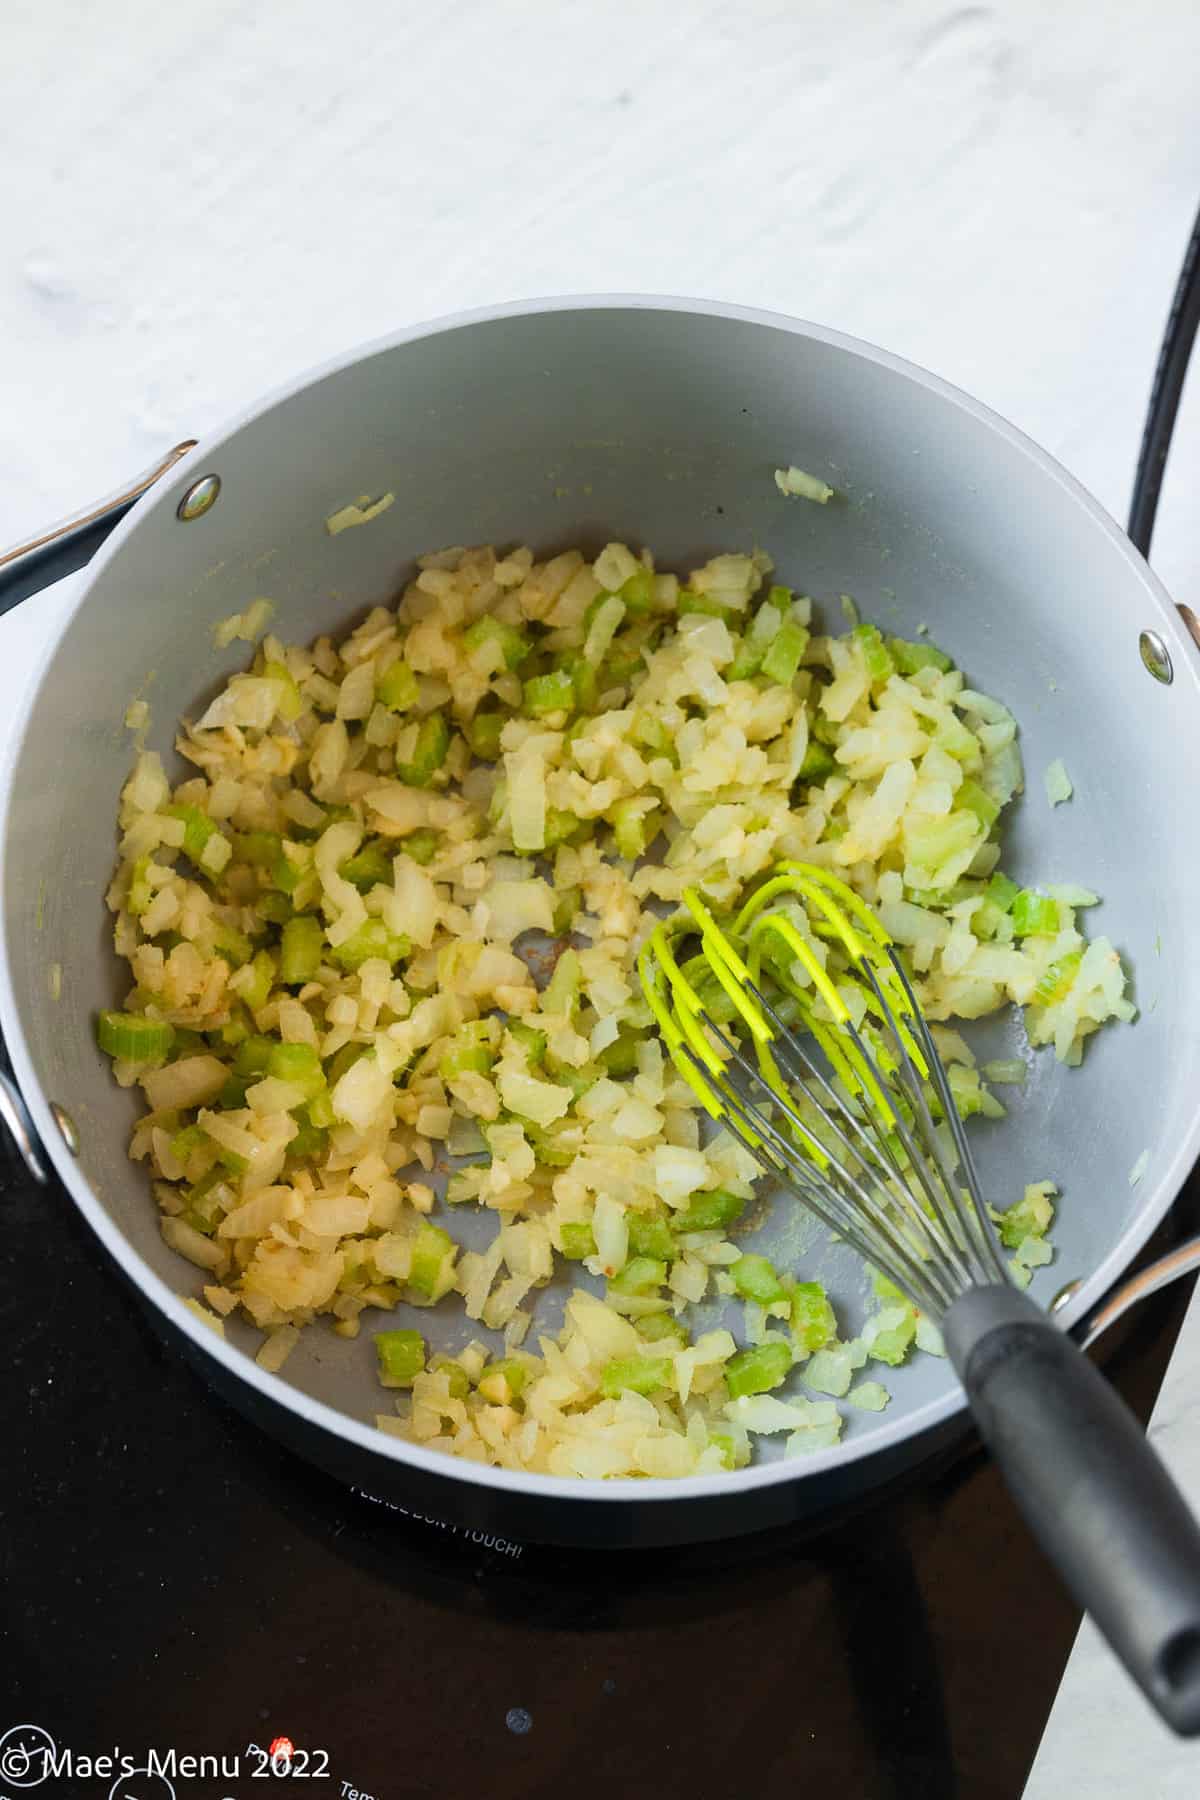 Whisking flour into a pan of onions and celery.